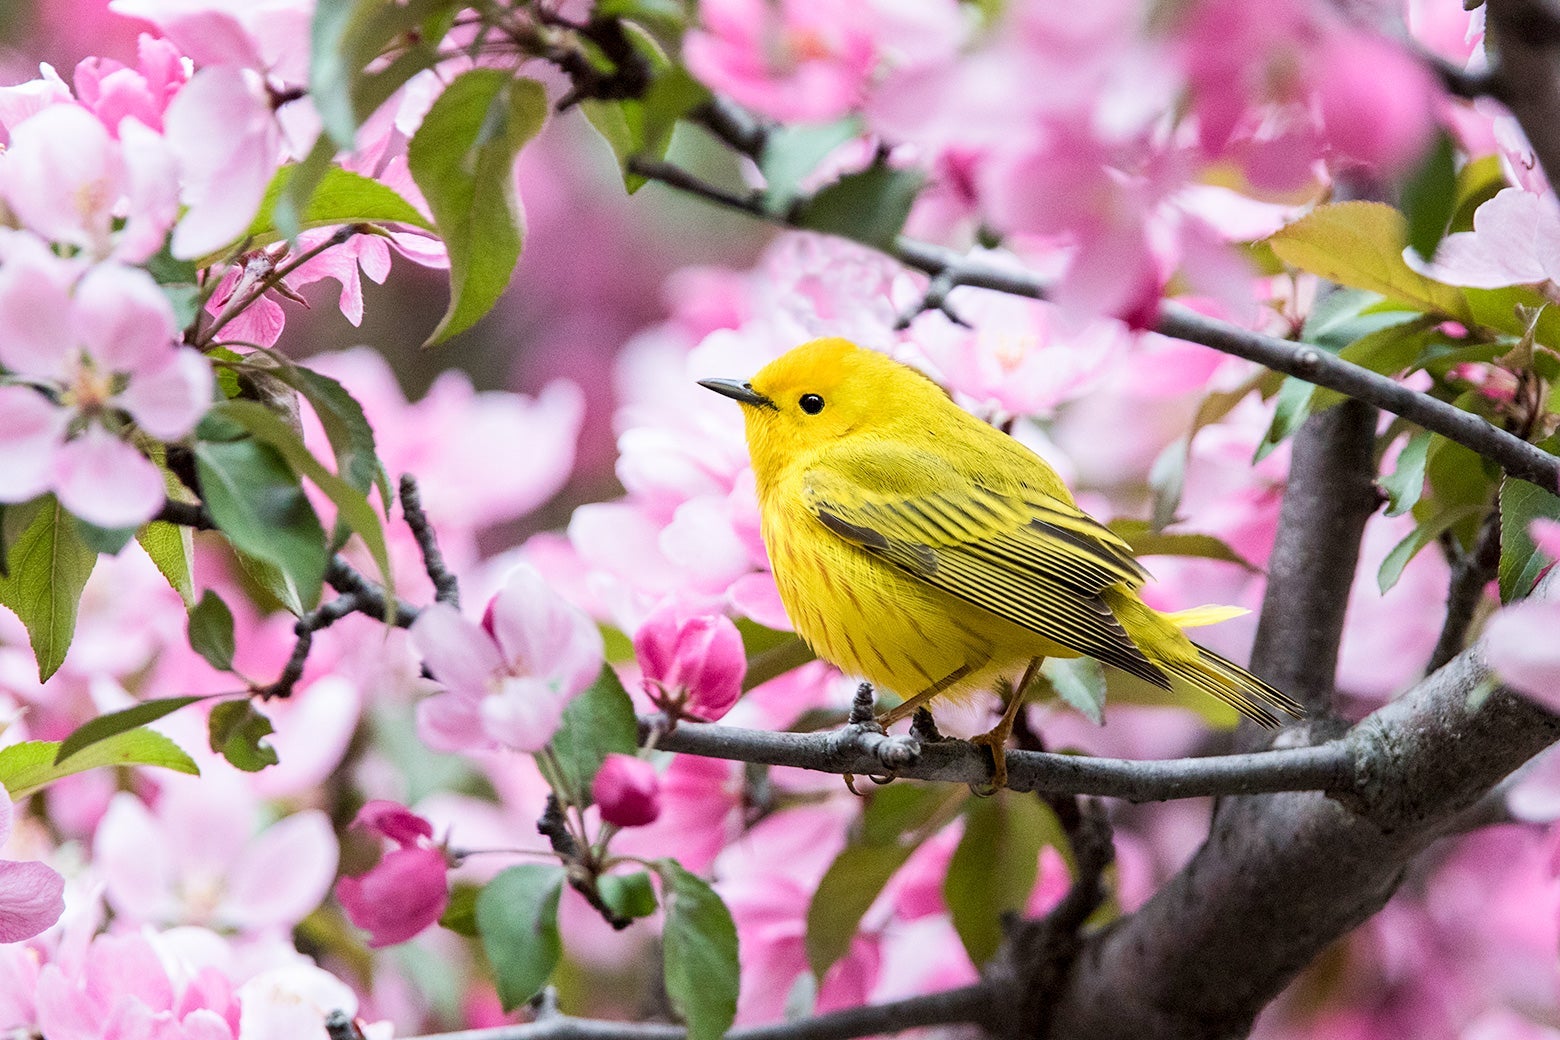 A yellow bird in a tree.